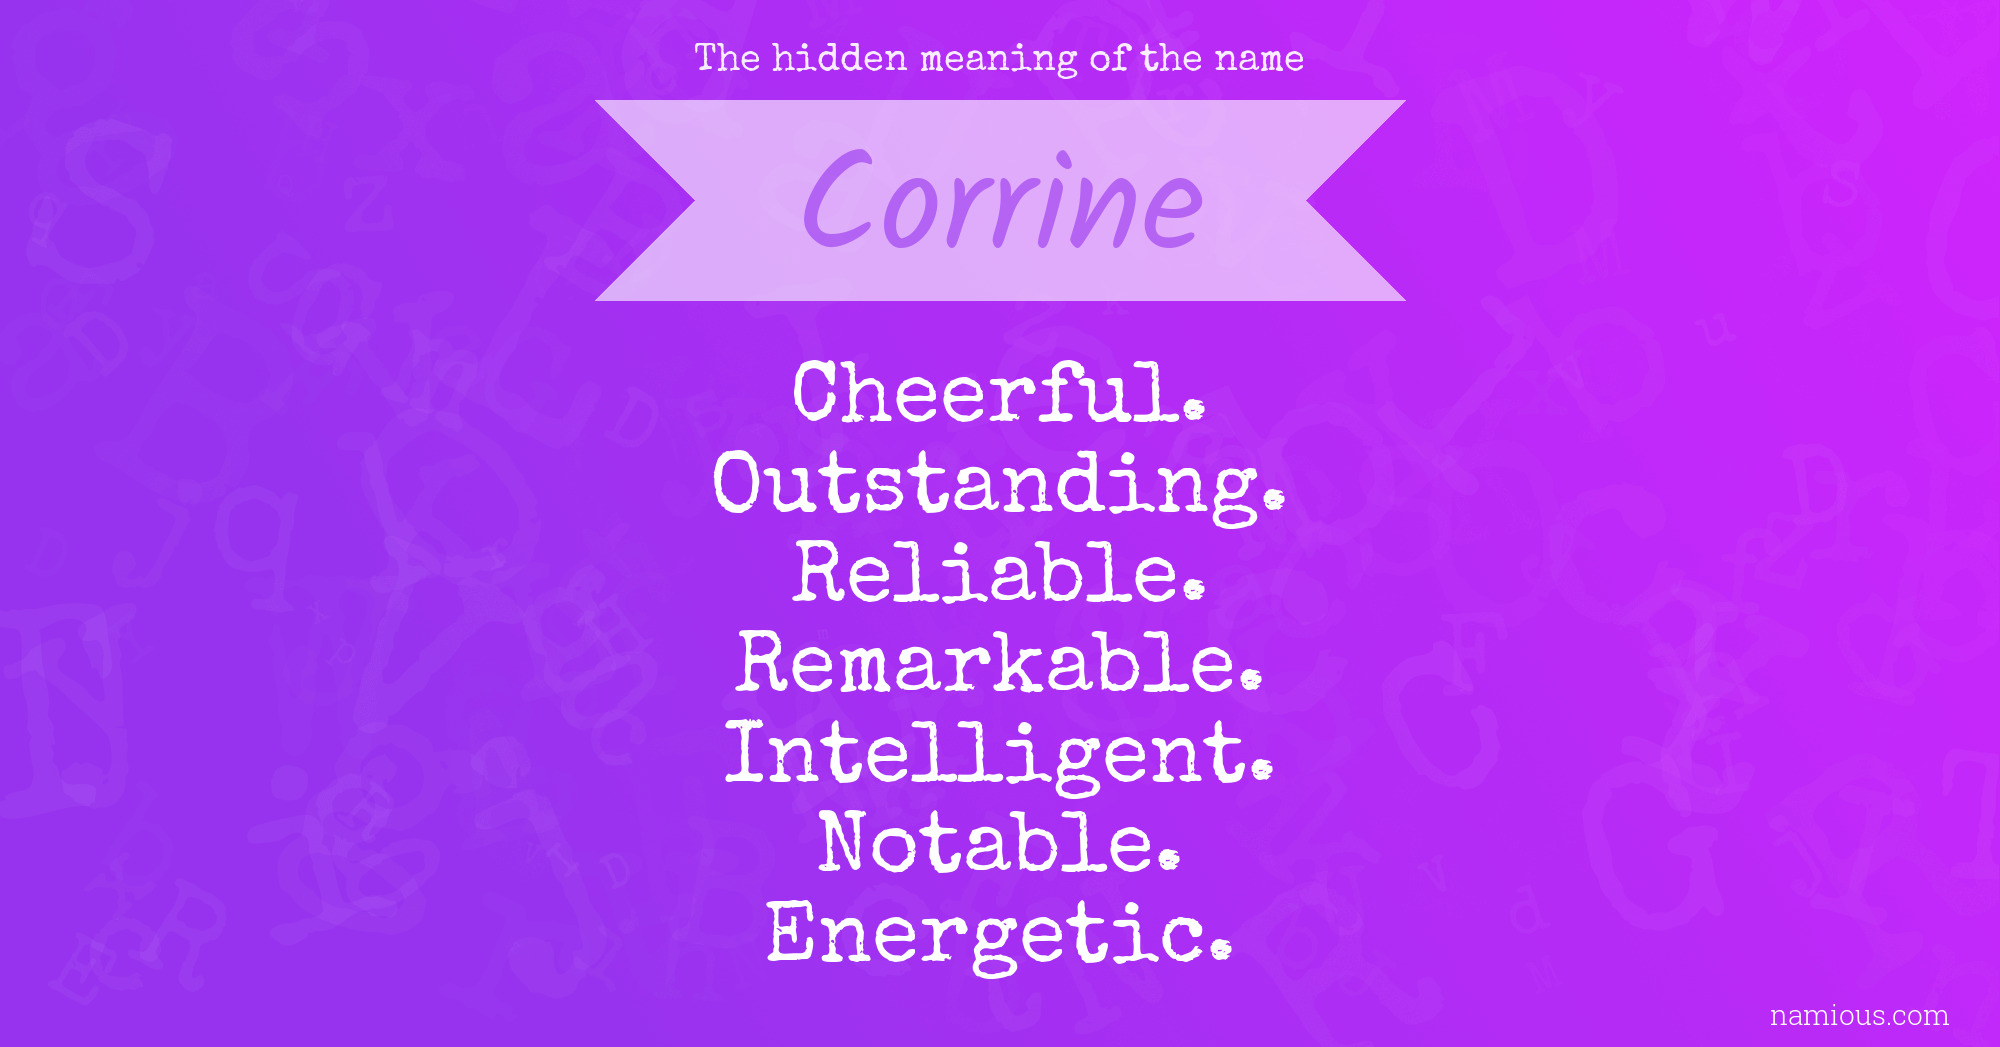 The hidden meaning of the name Corrine